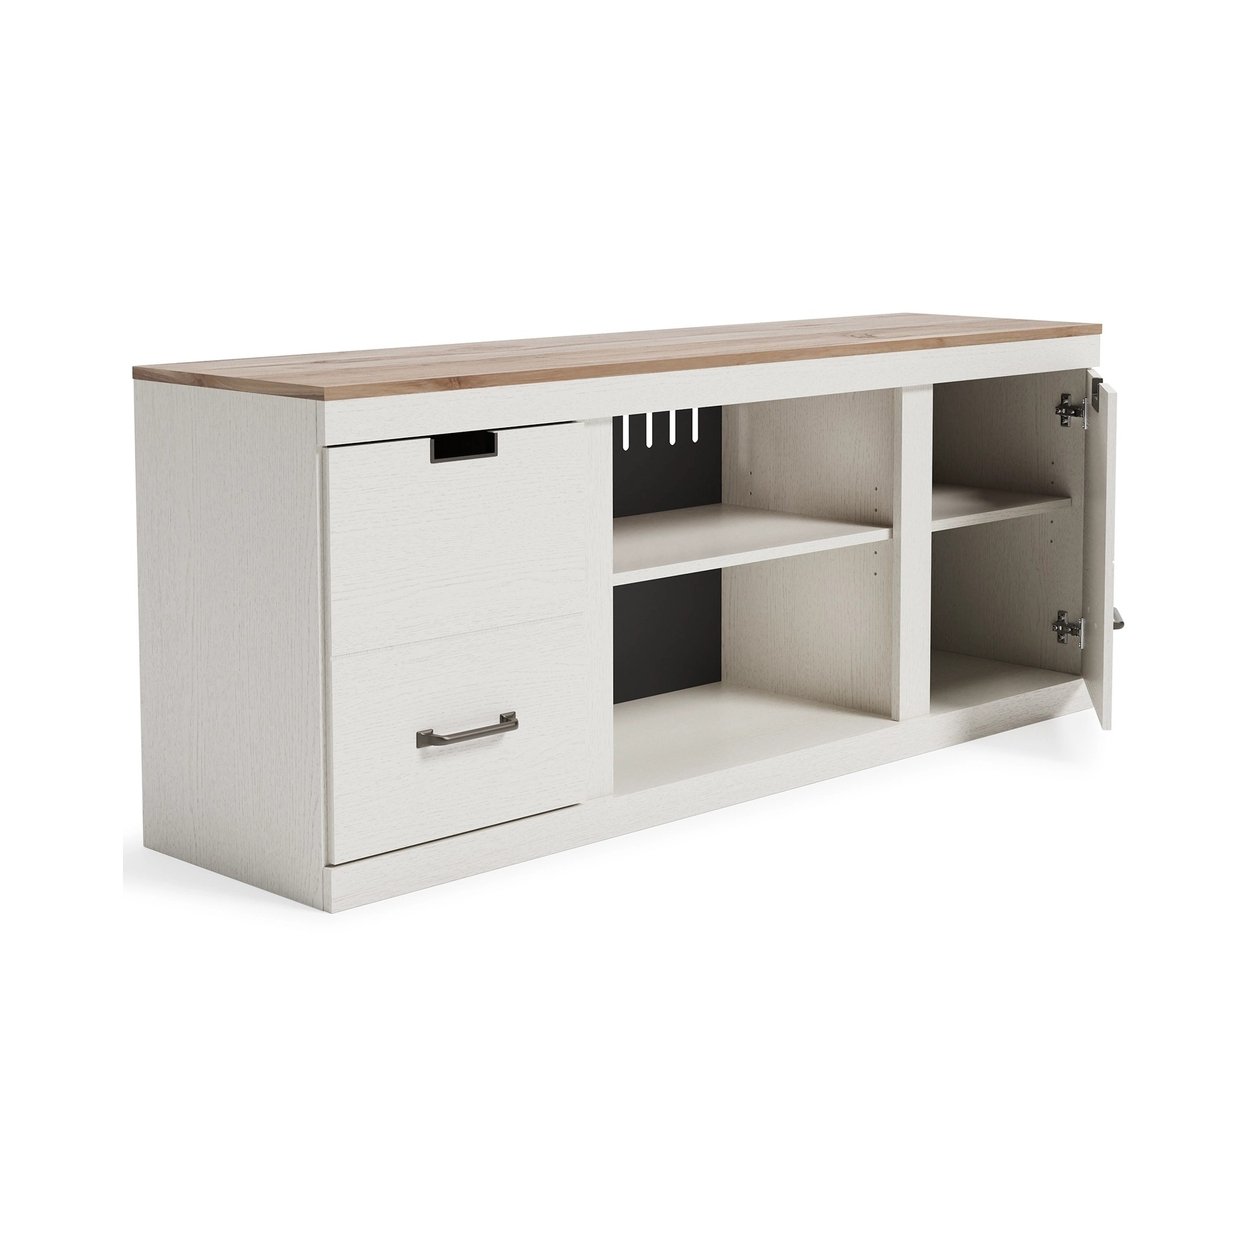 TV Stand With Fireplace And 4 Storage Drawers, White And Brown- Saltoro Sherpi